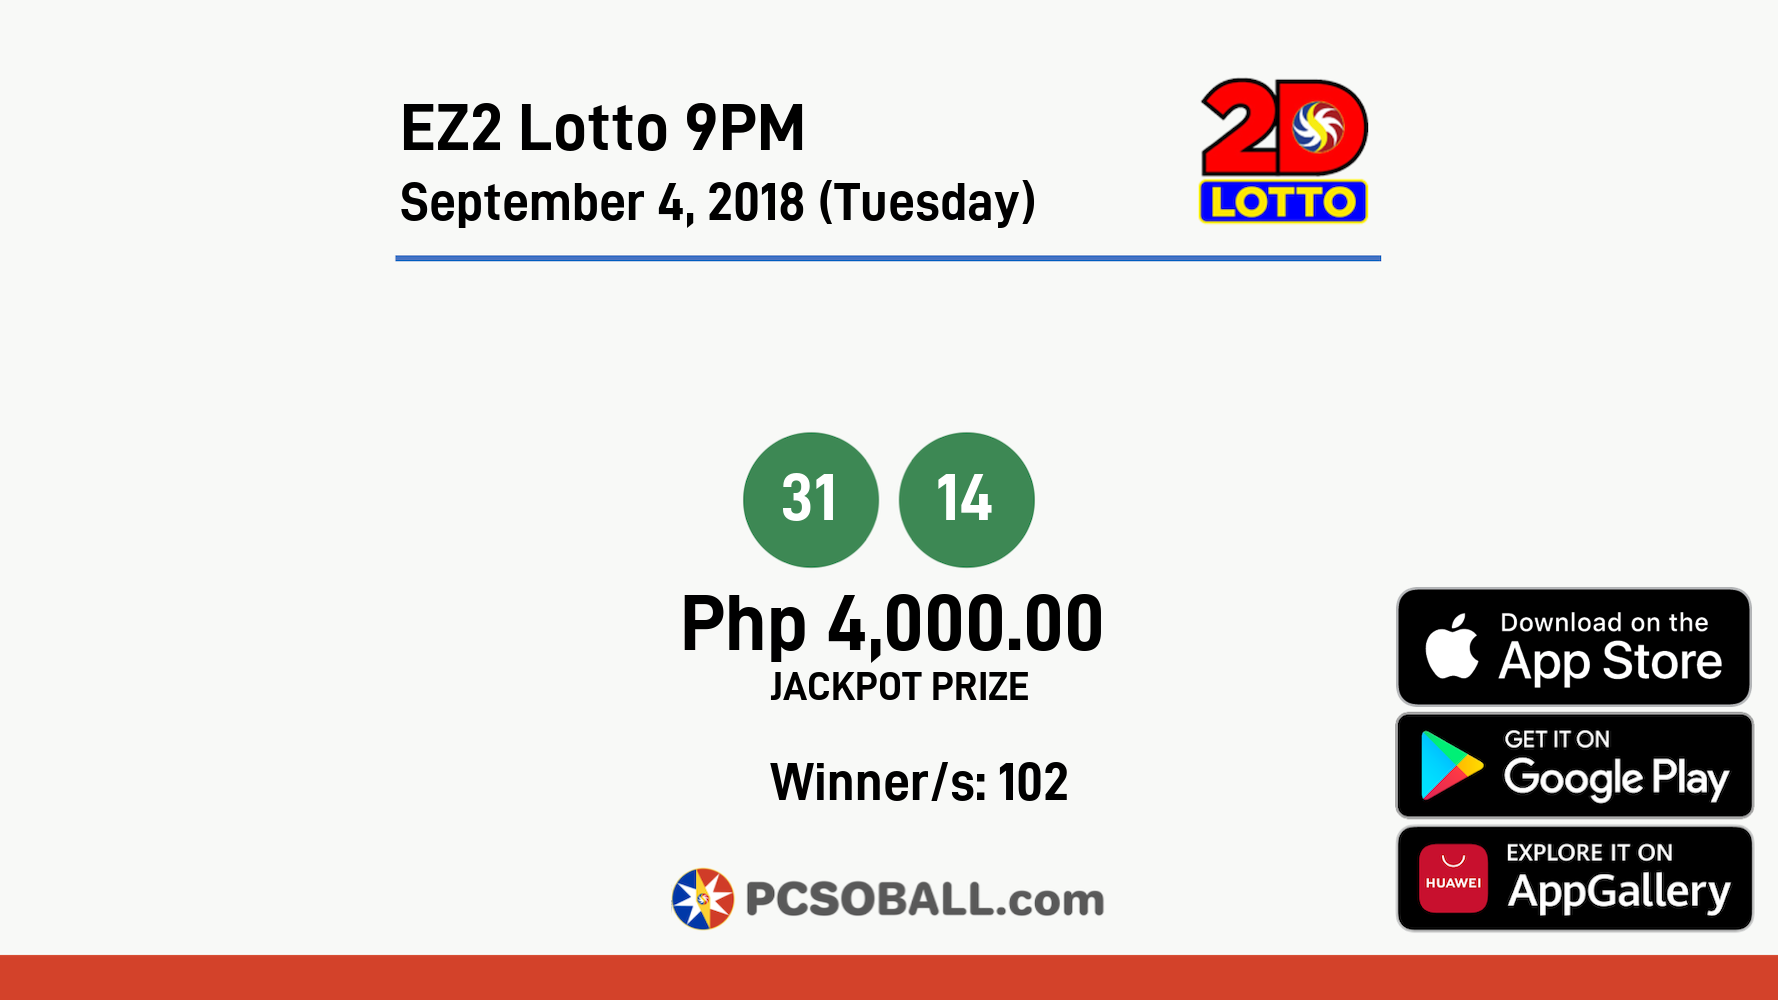 EZ2 Lotto 9PM September 4, 2018 (Tuesday) Result